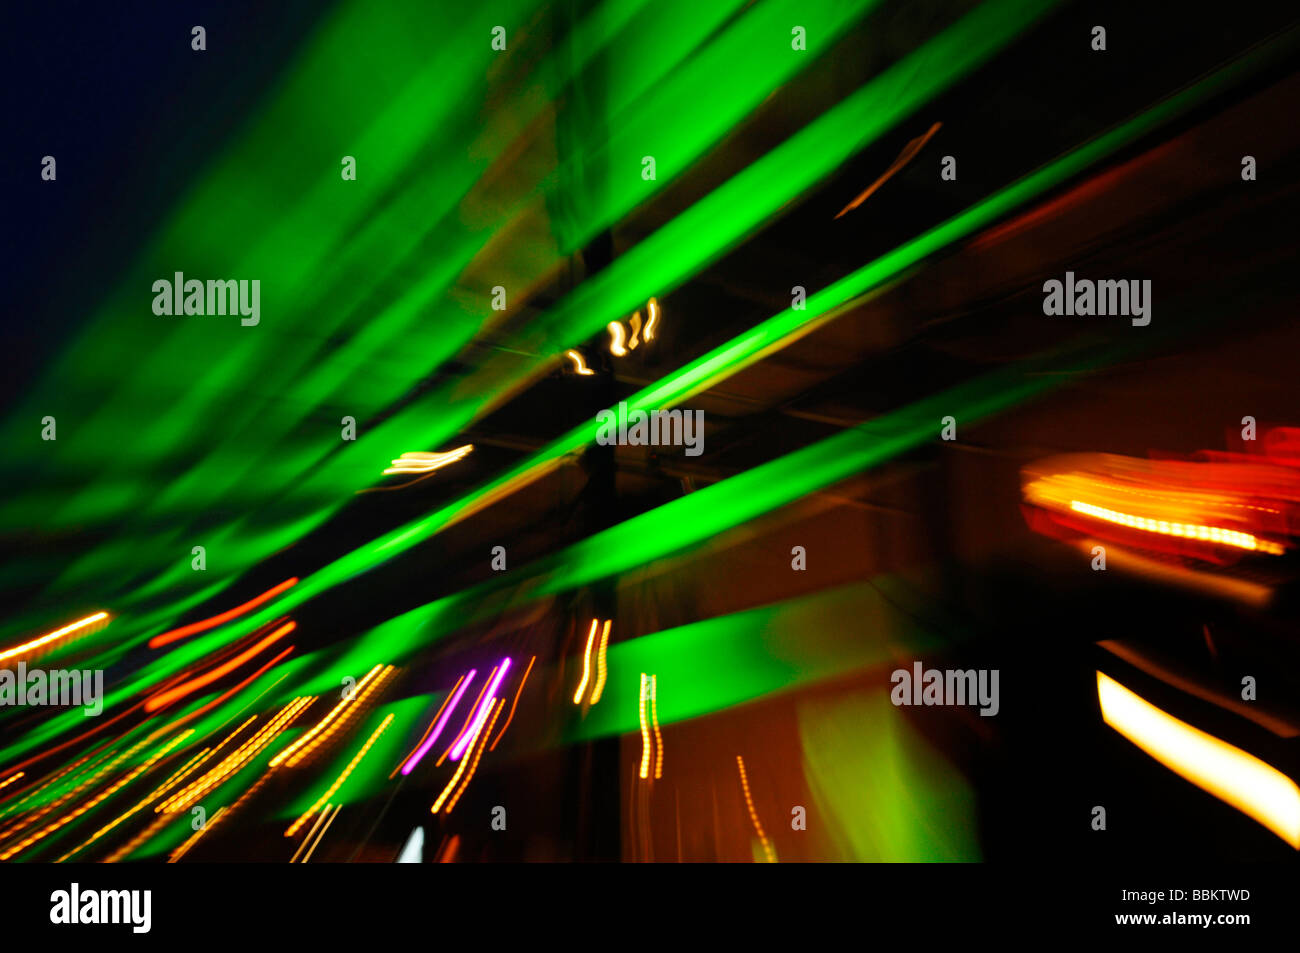 Light art at an event, front Voltahalle hall, Basel, Switzerland, Europe Stock Photo